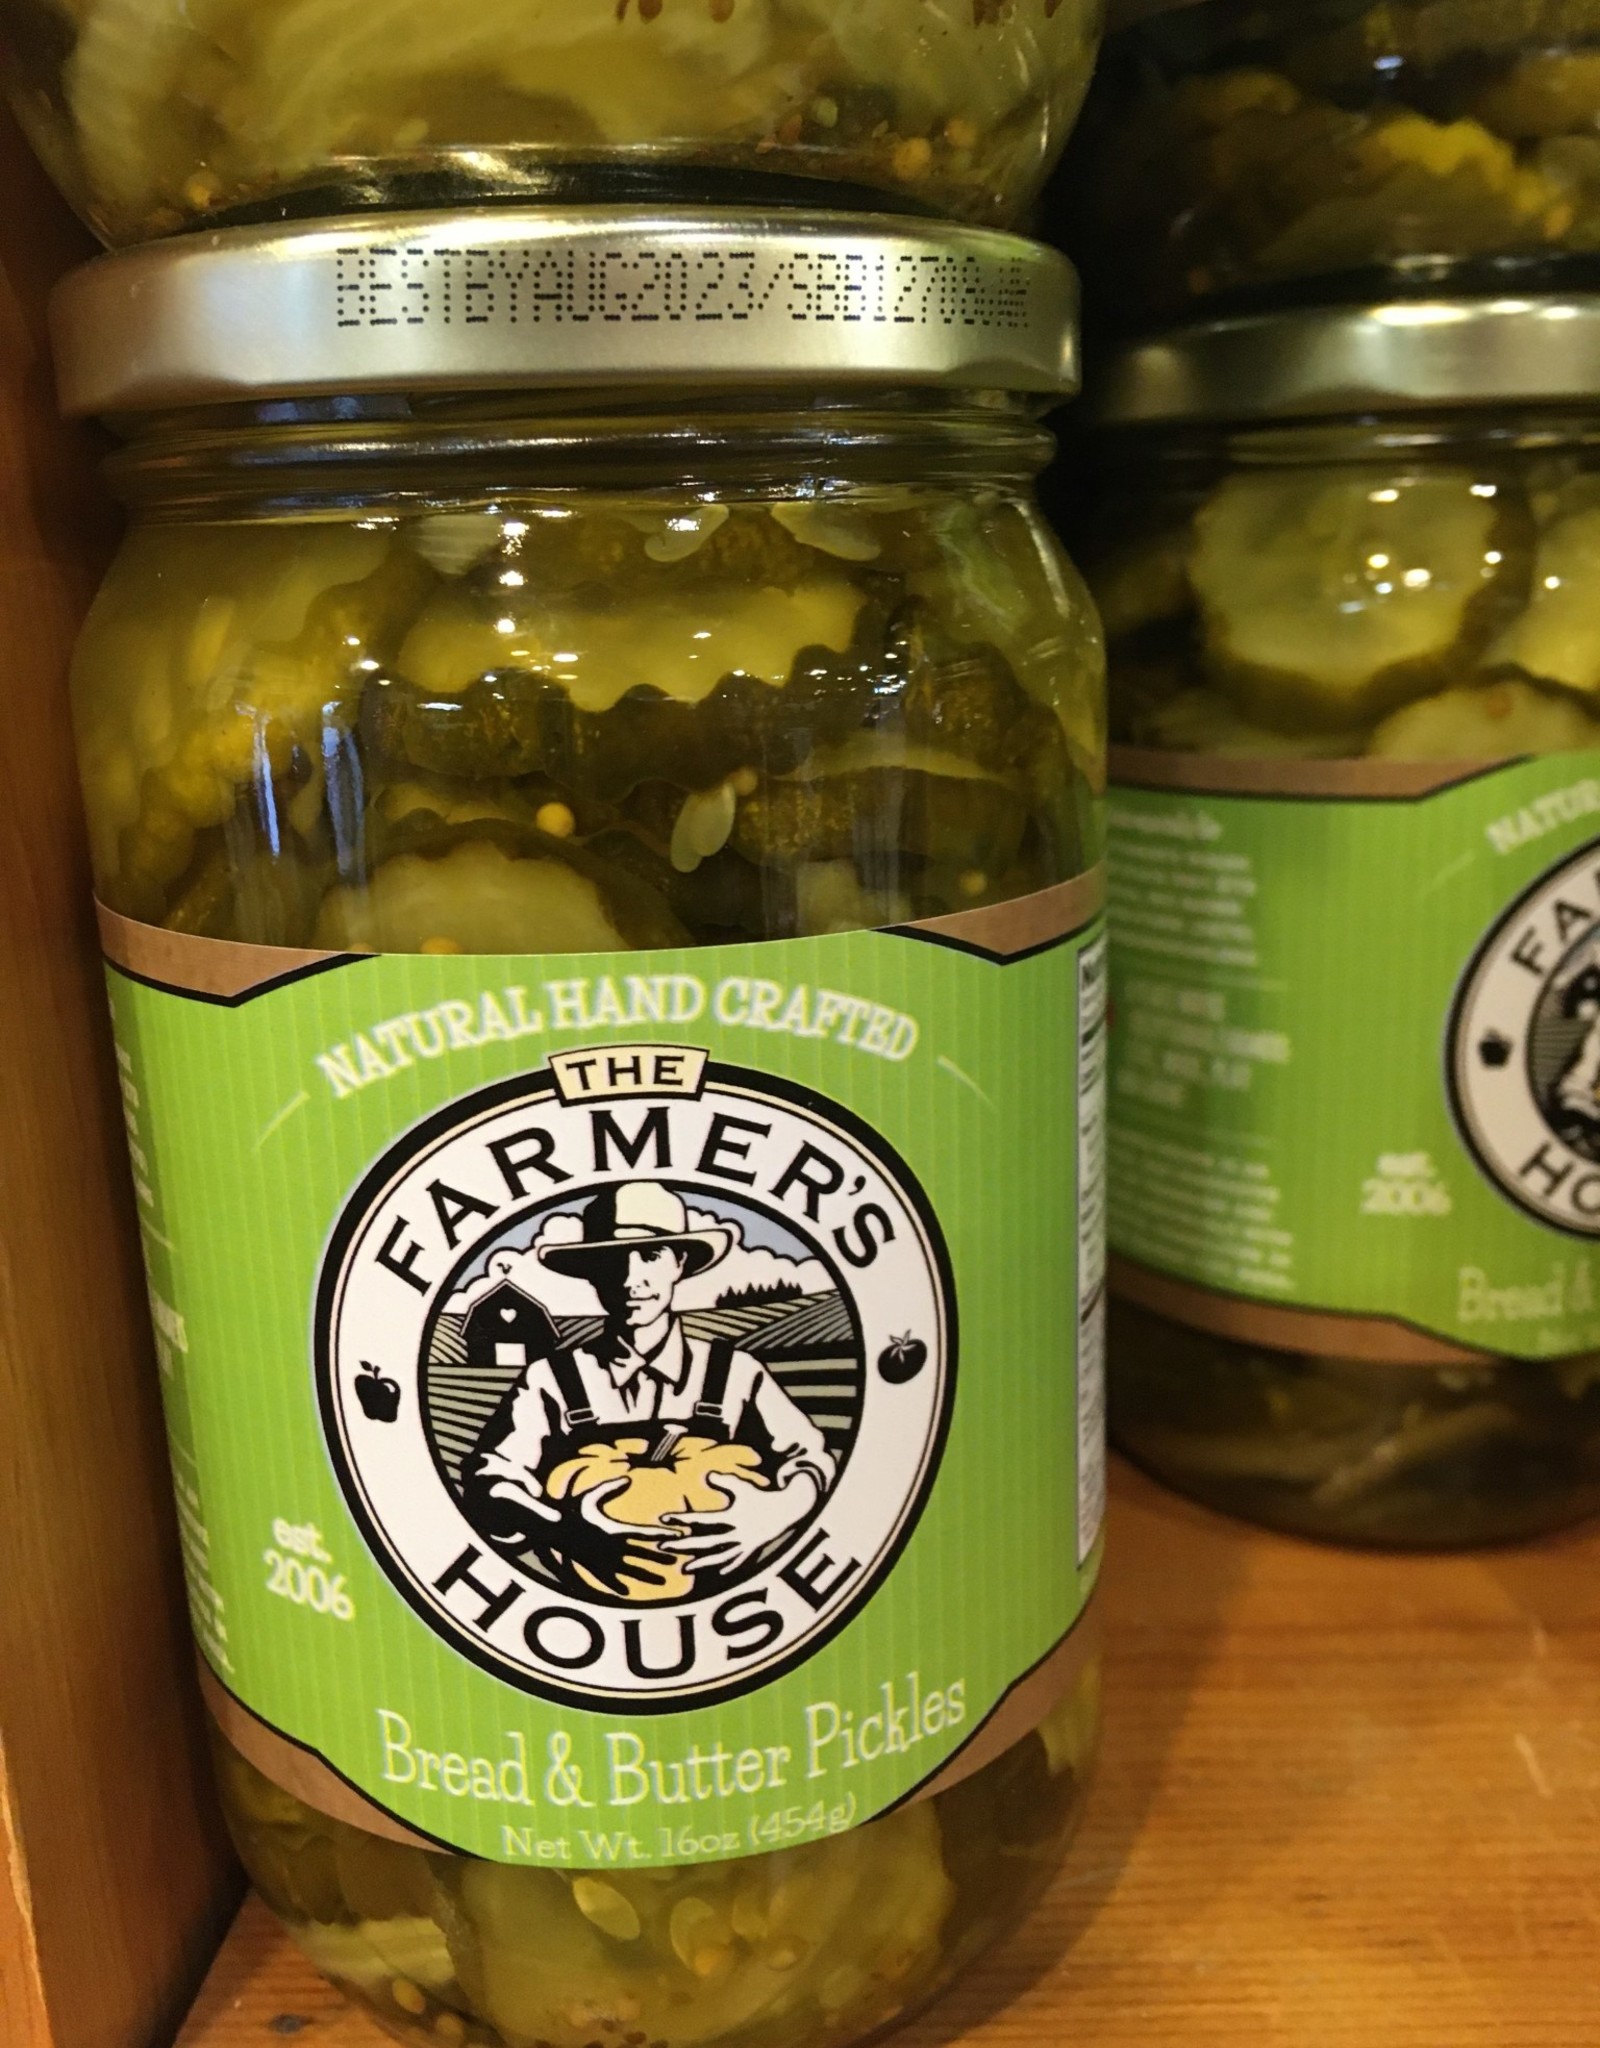 TFH Bread & Butter Pickles